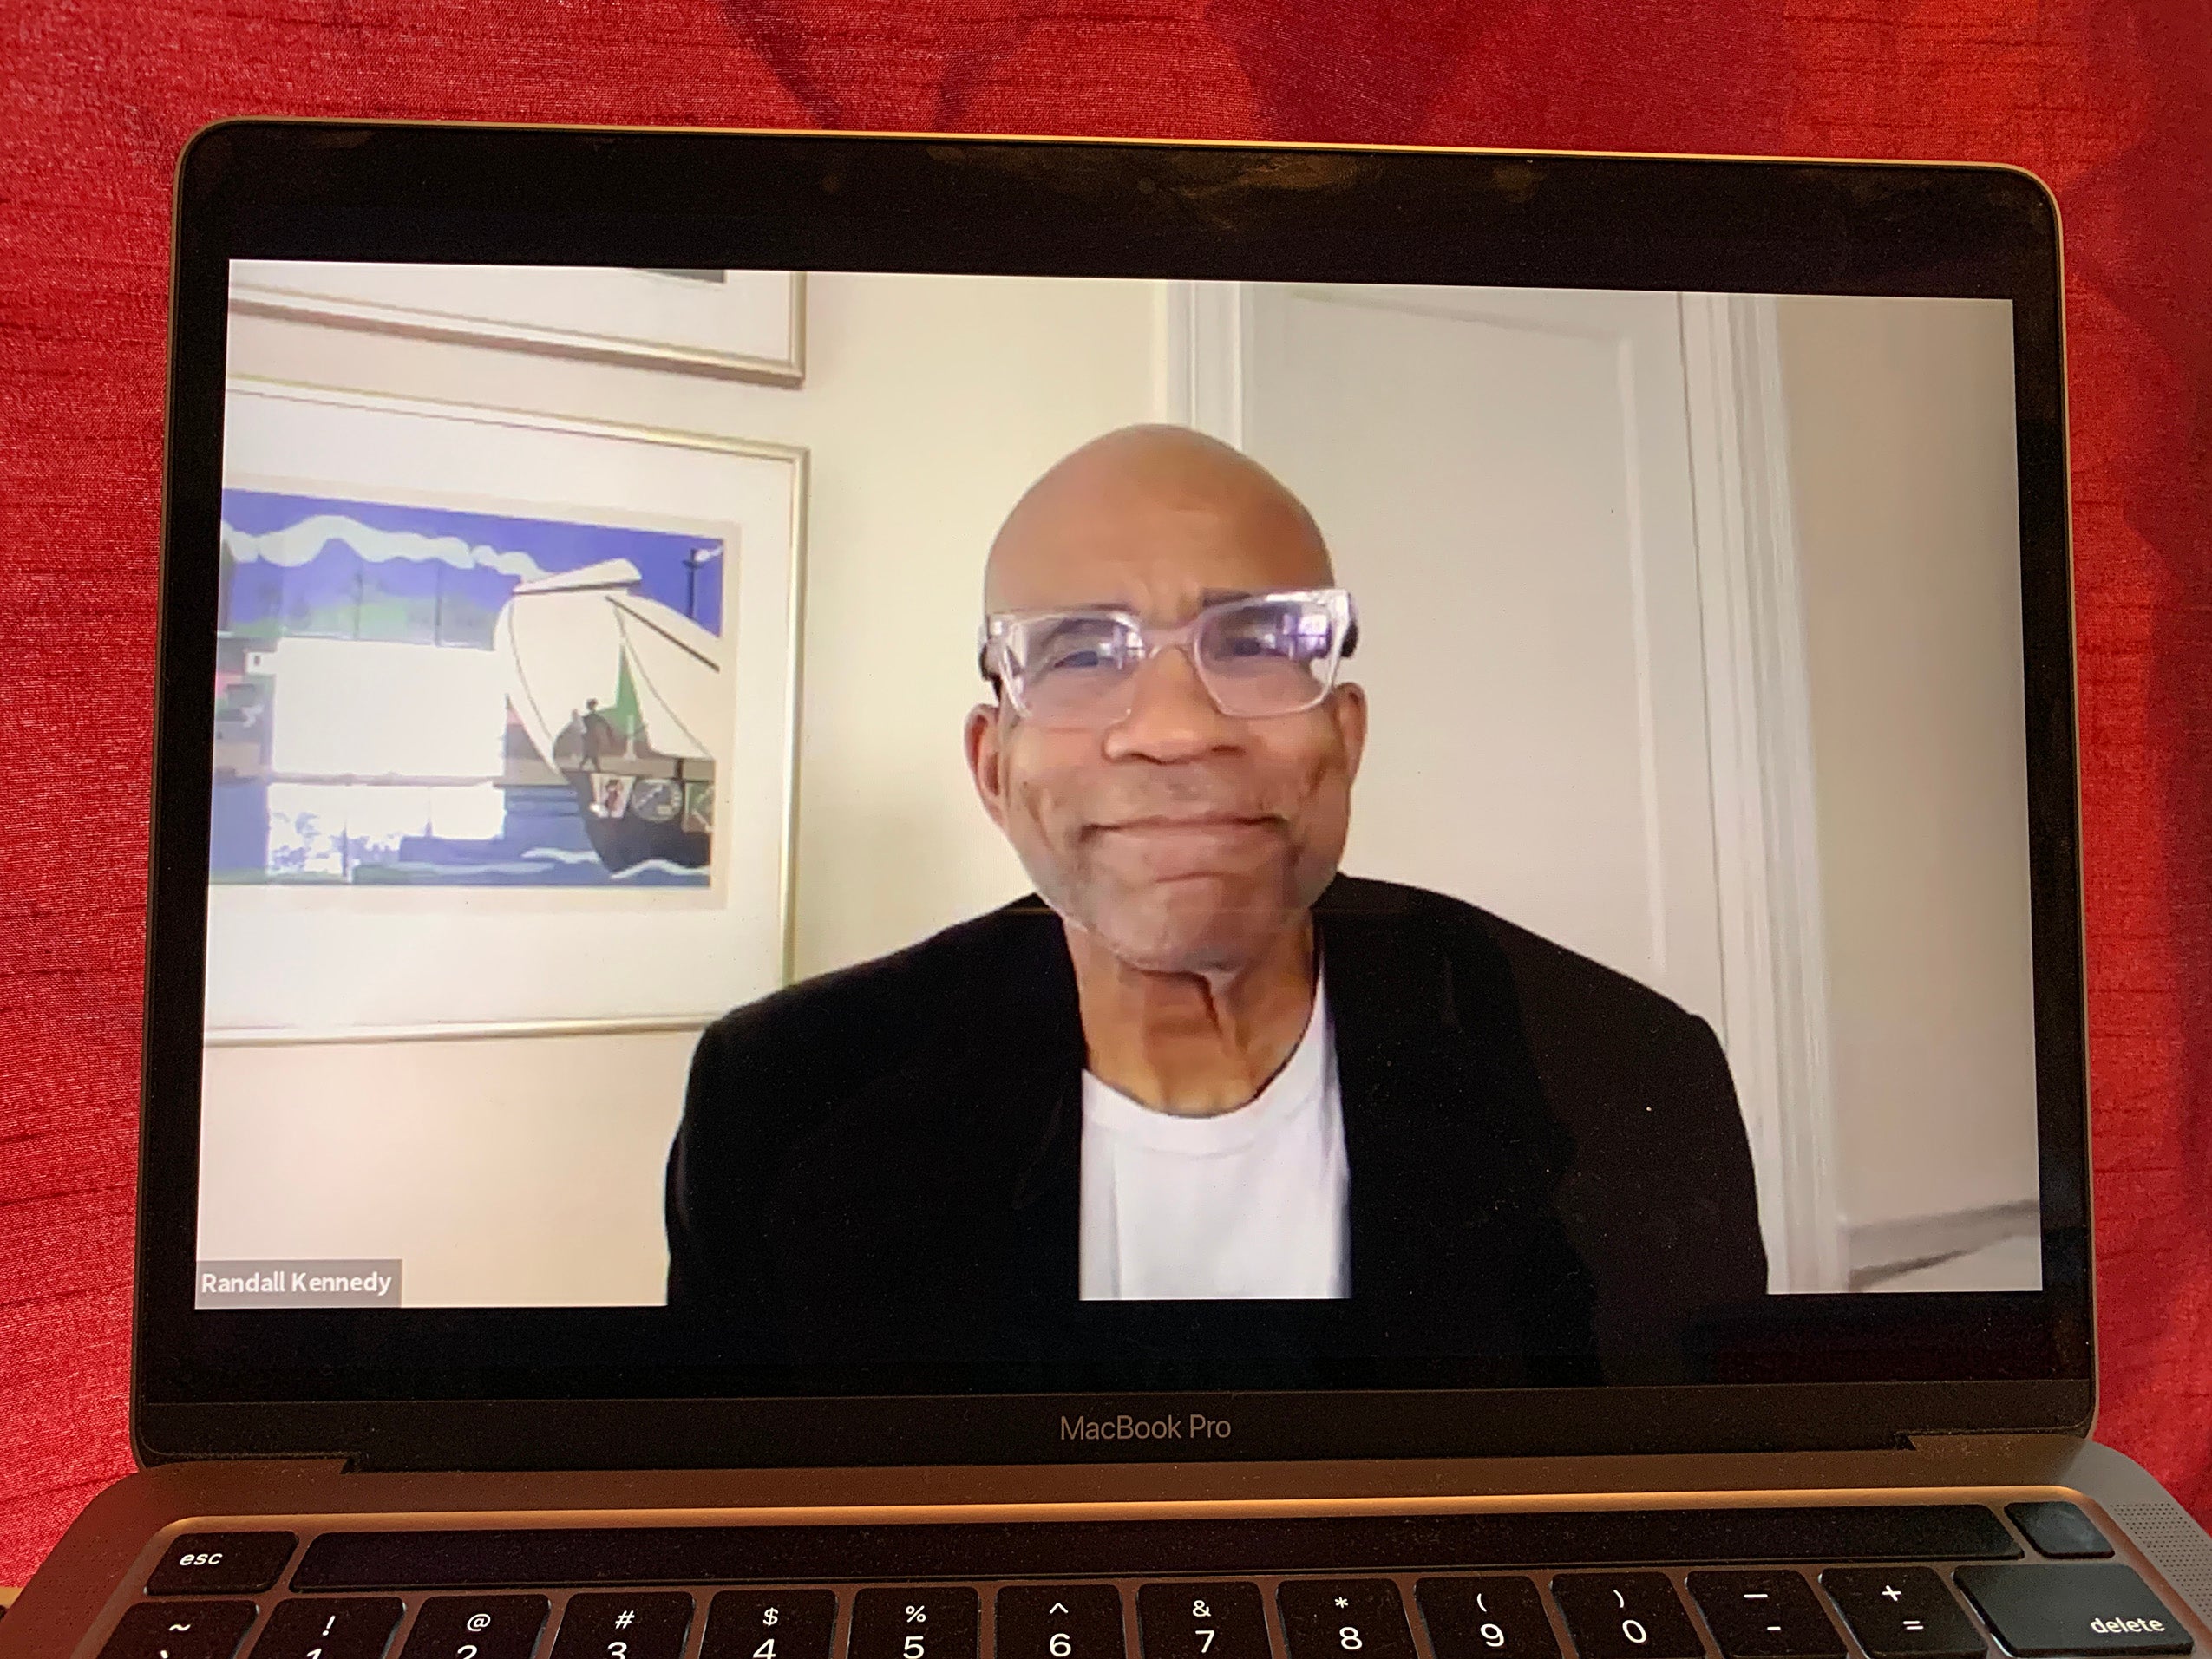 Randall Kennedy on a video call on a laptop